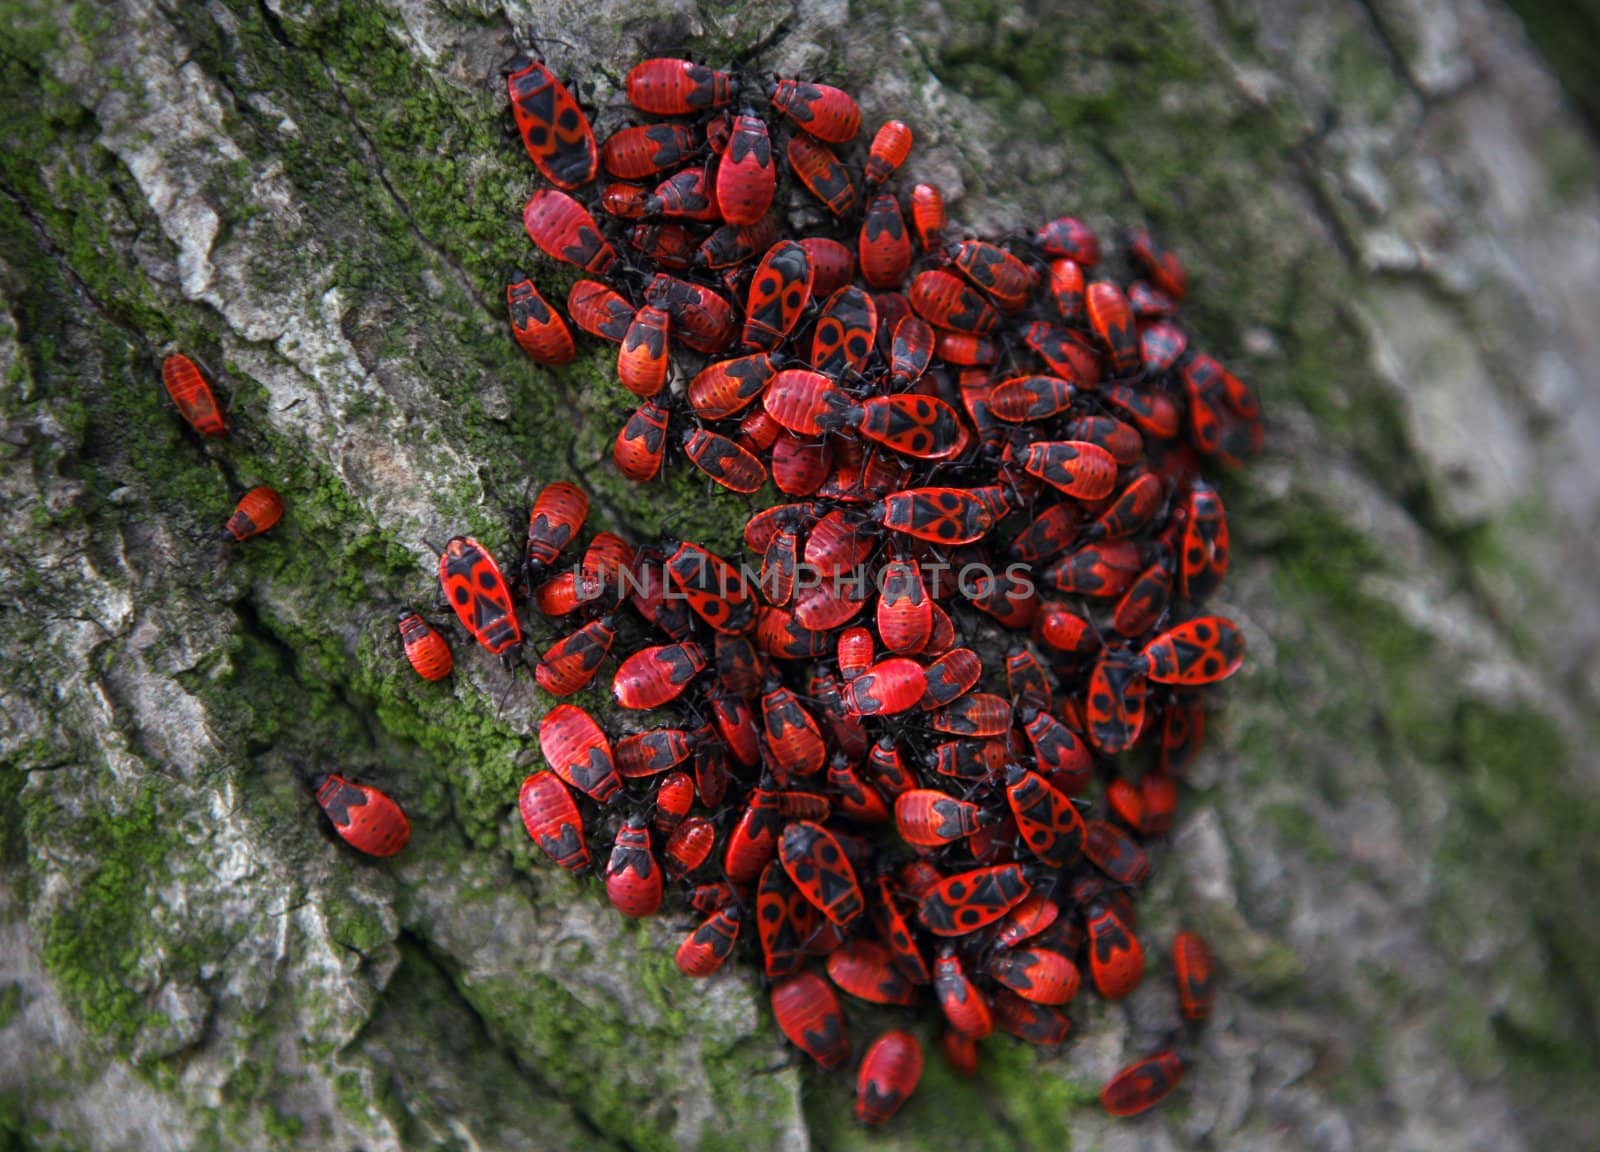 Many red and black firebugs on the tree